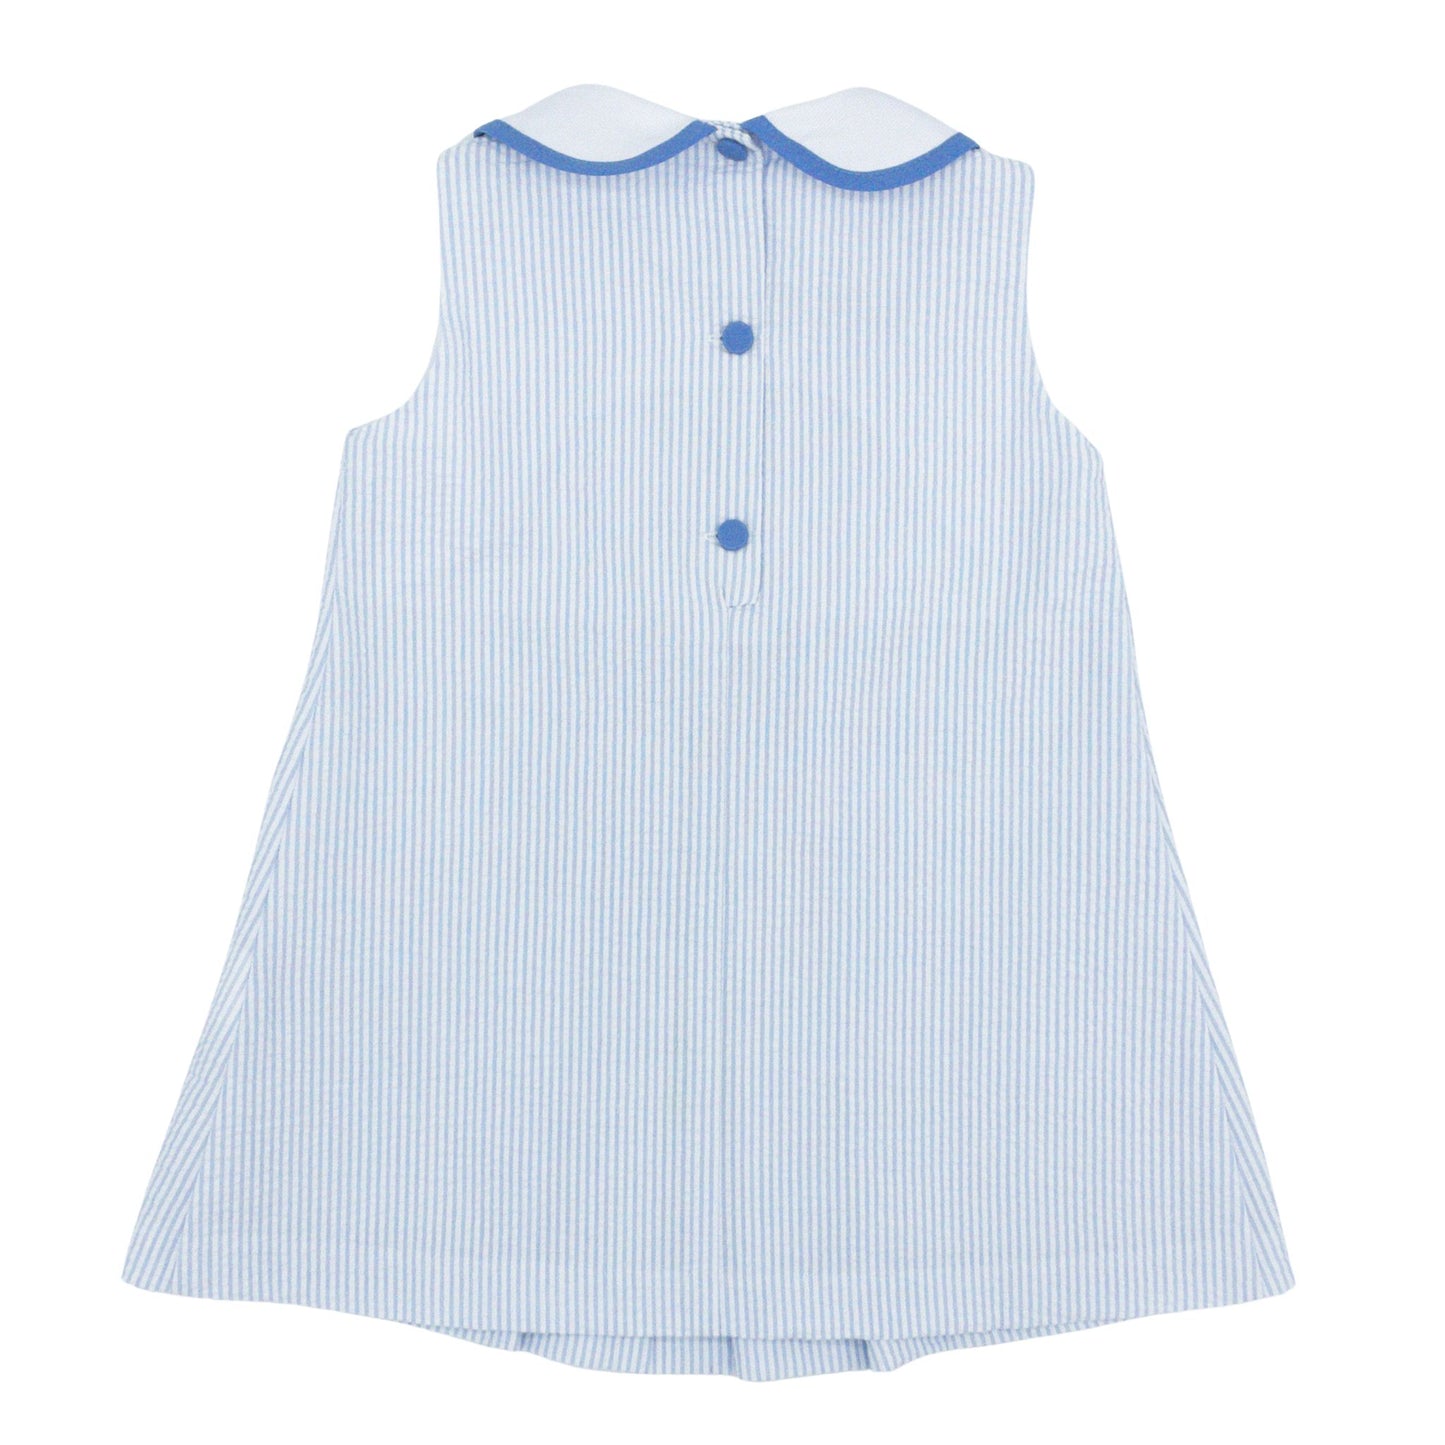 Girls Robyn Dress with Golf Embroidery